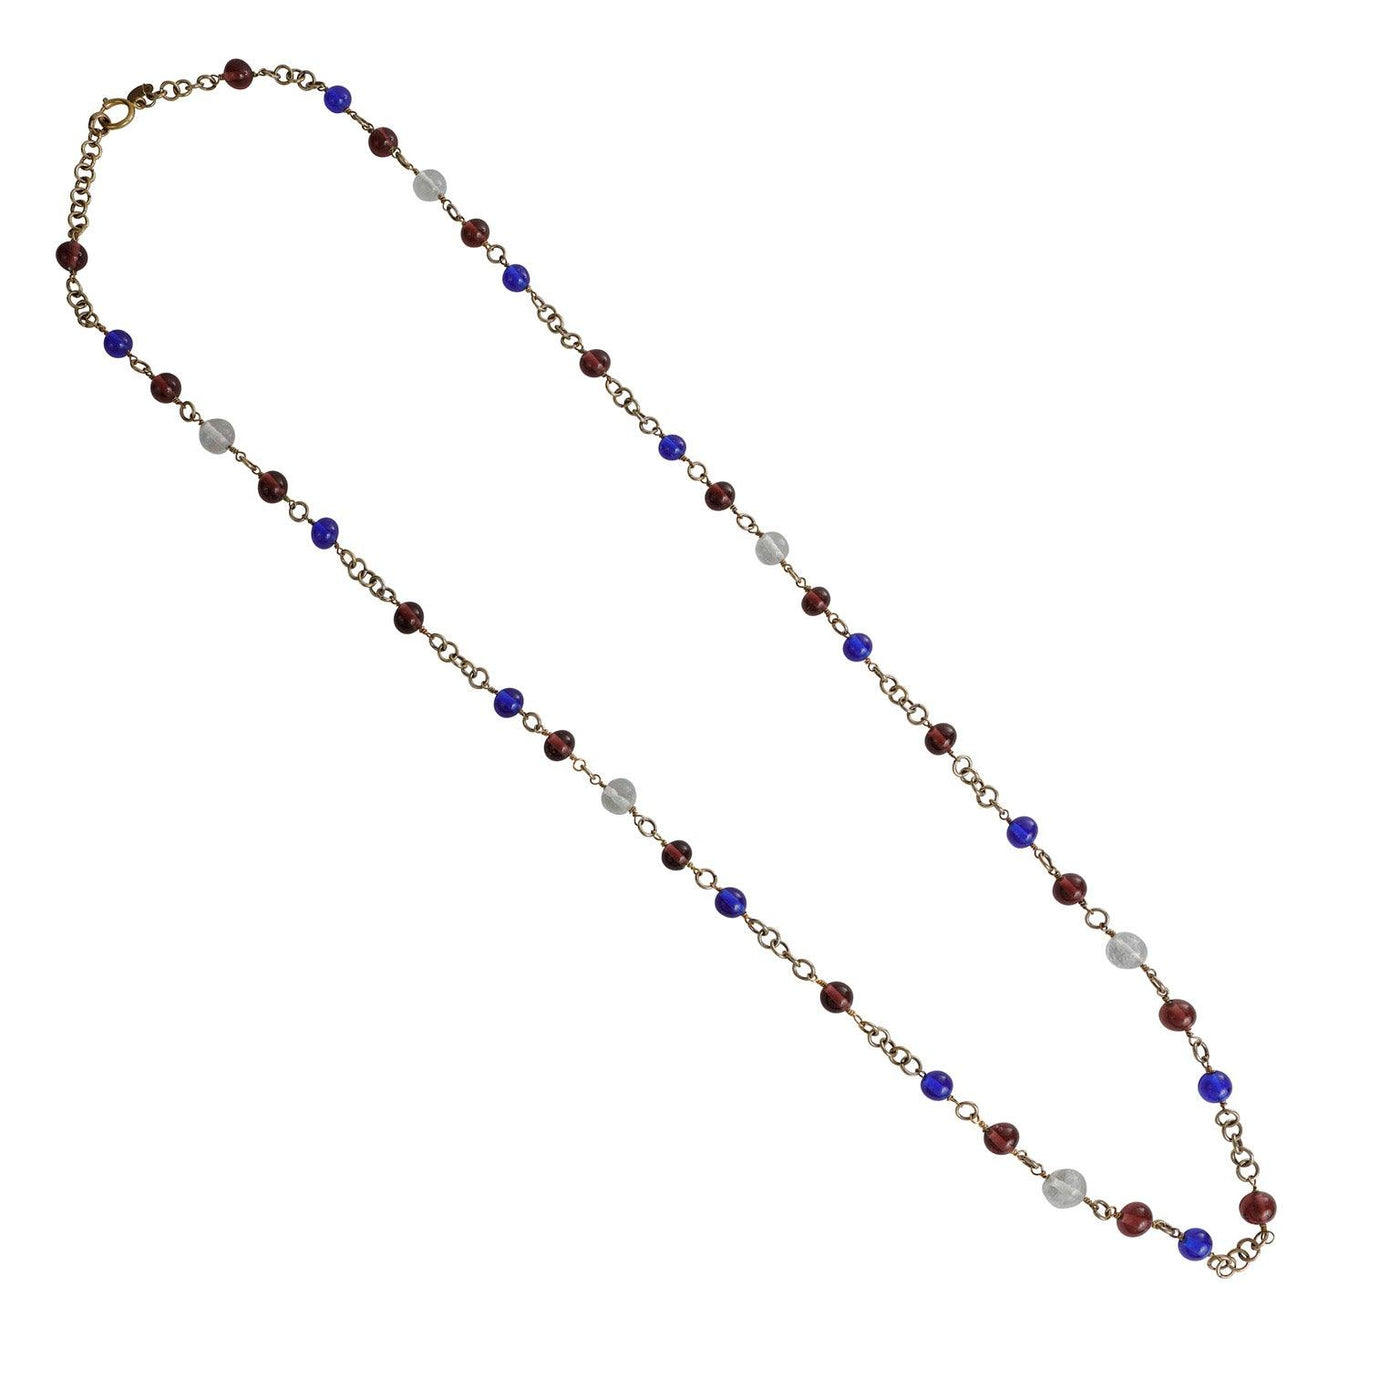 Chanel Purple and Blue Gripoix Beaded Vintage Necklace - Only Authentics